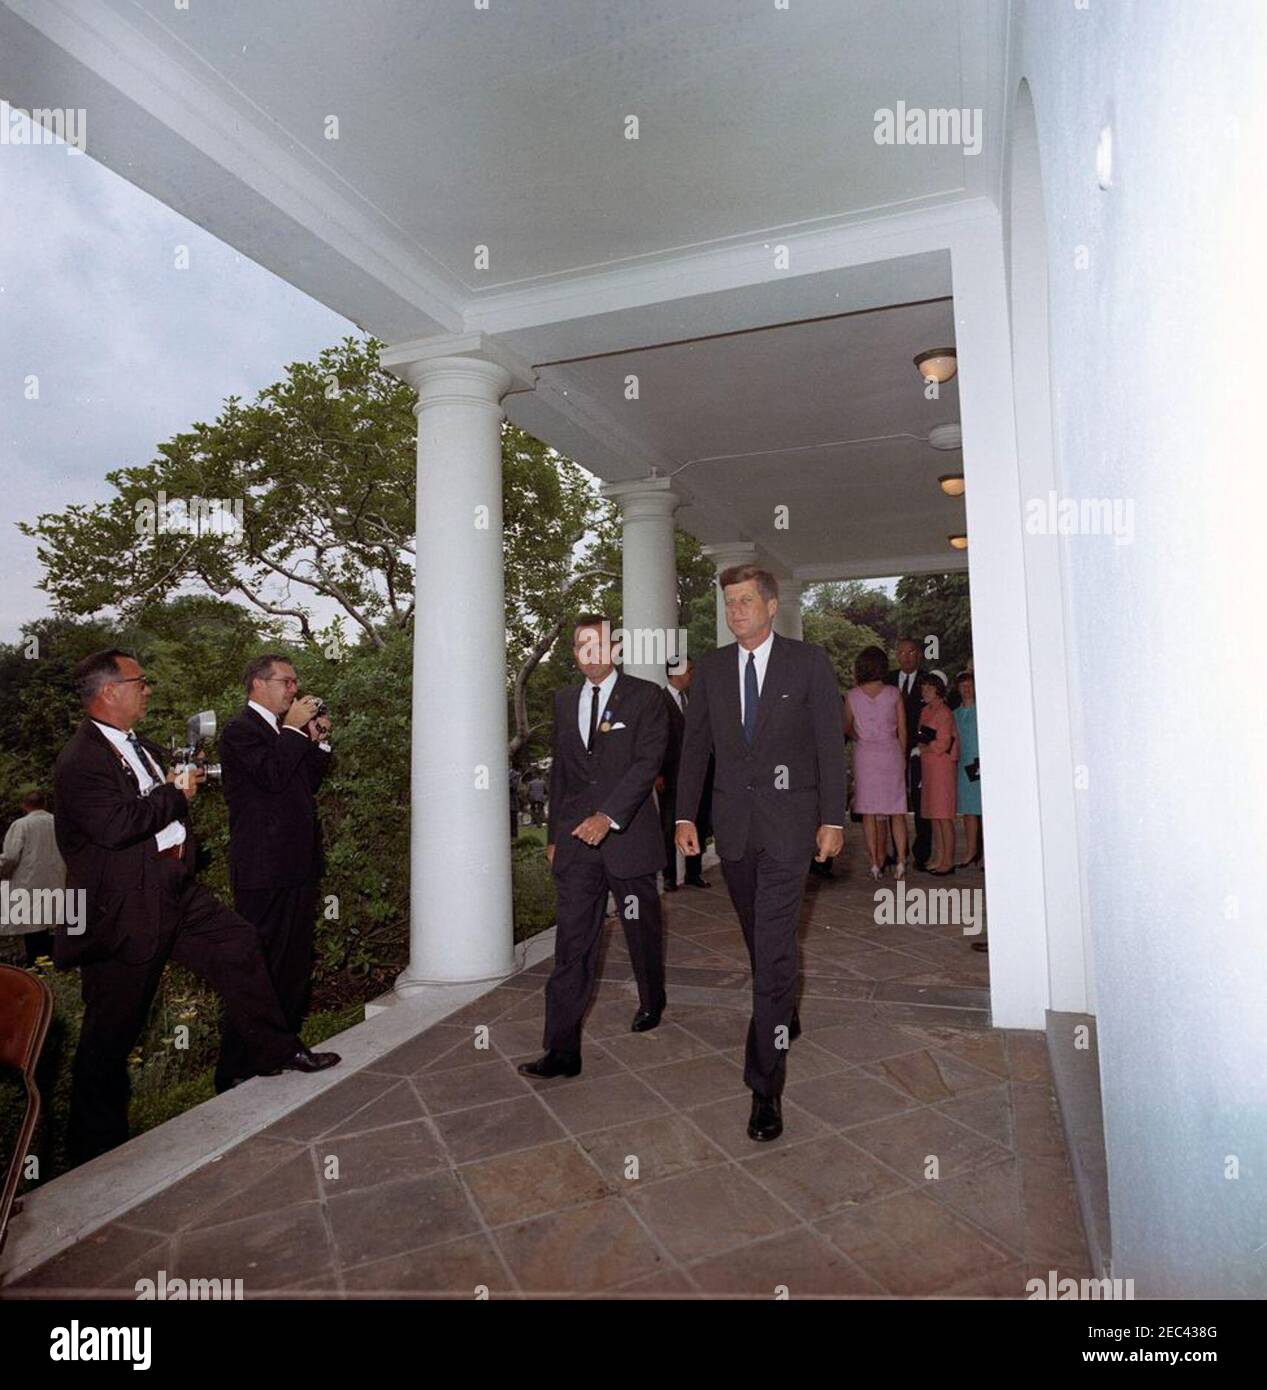 Presentation of the National Aeronautics and Space Administration (NASA) Distinguished Service Medal (DSM) to Astronaut Major L. Gordon Cooper, 12:15PM. President John F. Kennedy and astronaut Major L. Gordon Cooper walk along the West Wing Colonnade, following Major Cooperu2019s National Aeronautics and Space Administration (NASA) Distinguished Service Medal (DSM) presentation ceremony. Standing at right in background: First Lady Jacqueline Kennedy; Vice President Lyndon B. Johnson; Major Cooperu2019s daughters, Janita and Camala. Two unidentified photographers stand at left. White House, W Stock Photo